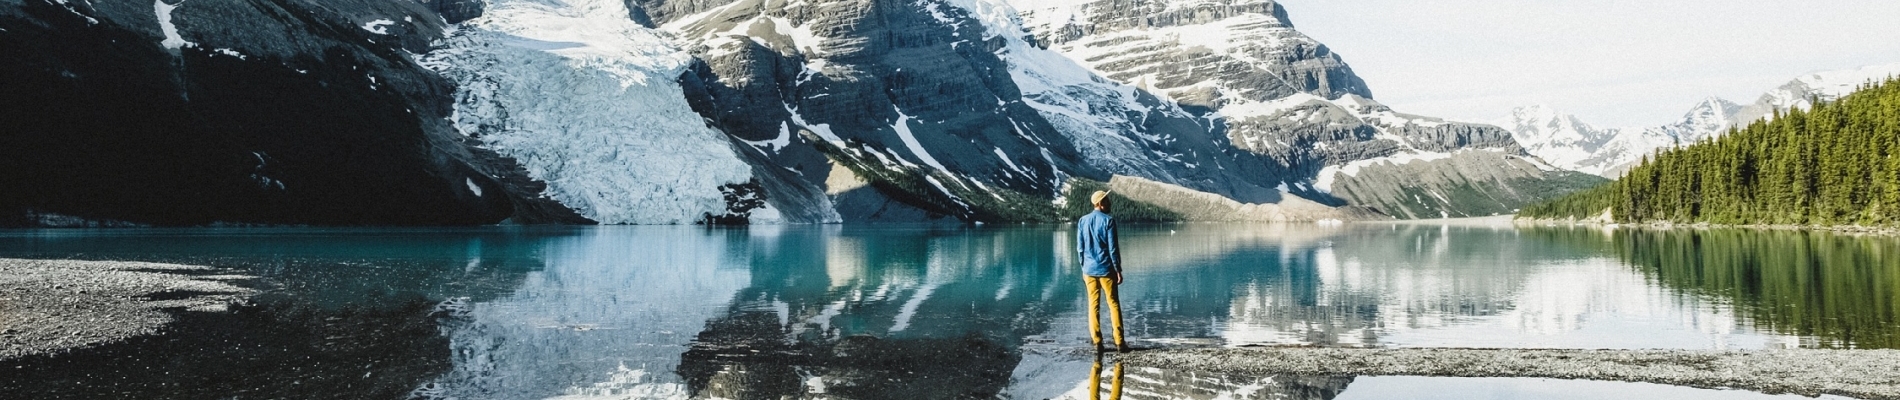 A person stands by a lake in Mount Robson Provincial Park